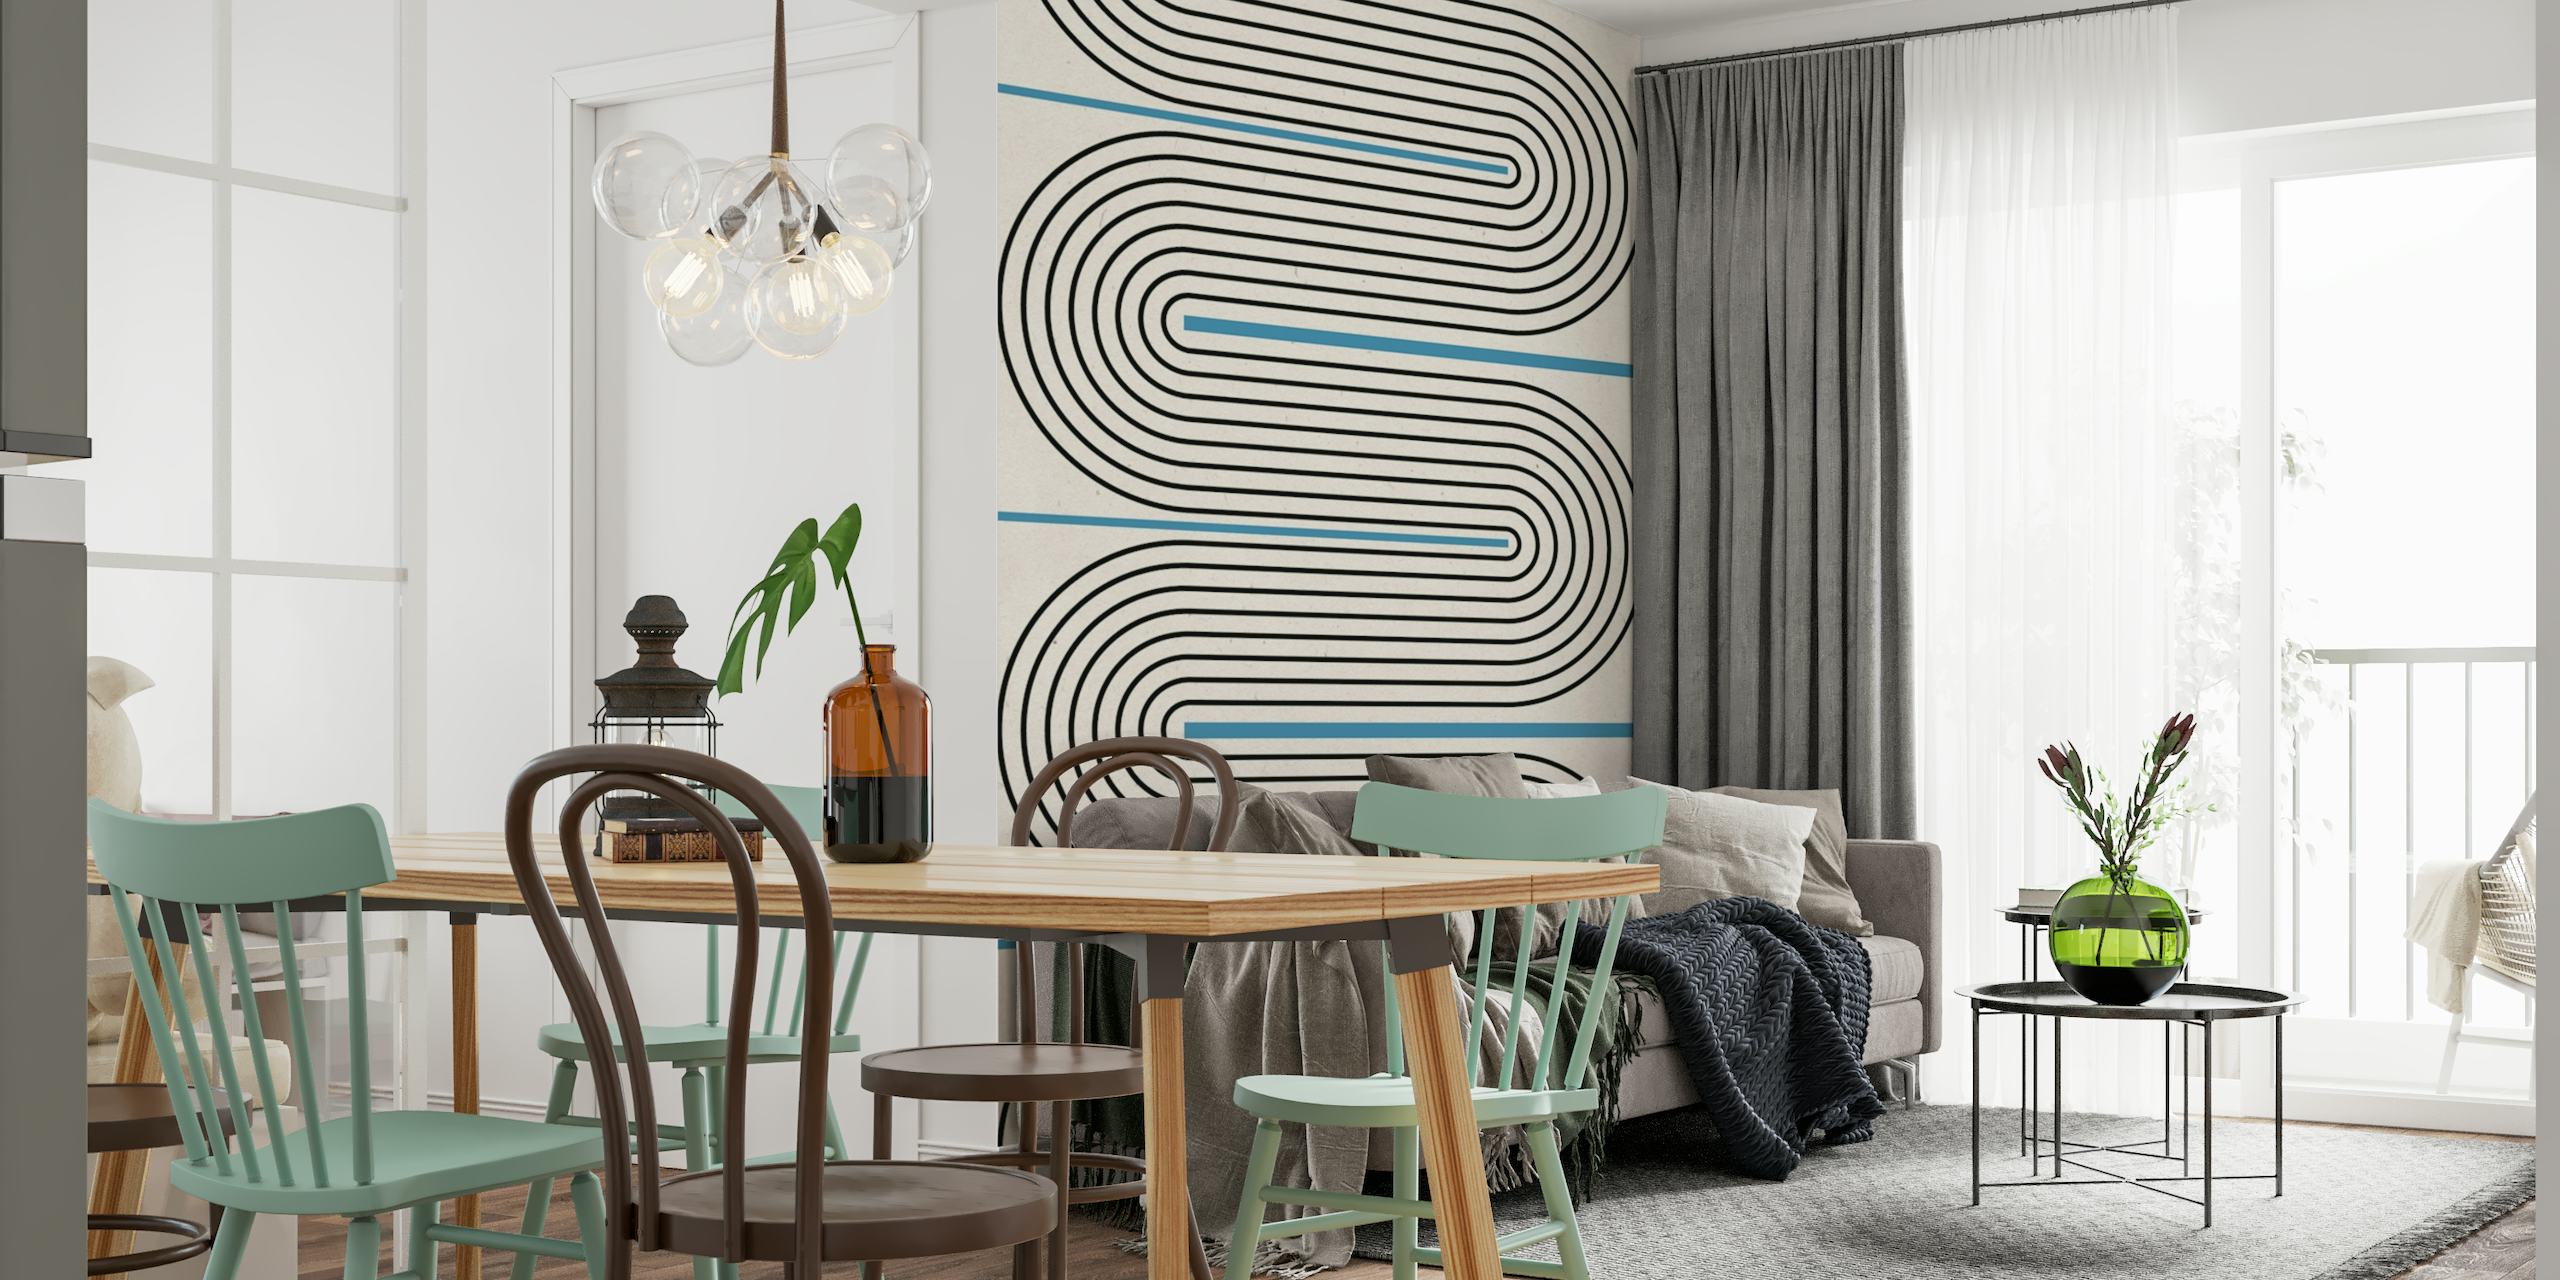 Abstract blue and black lines creating a balanced and harmonious design on a neutral background wall mural